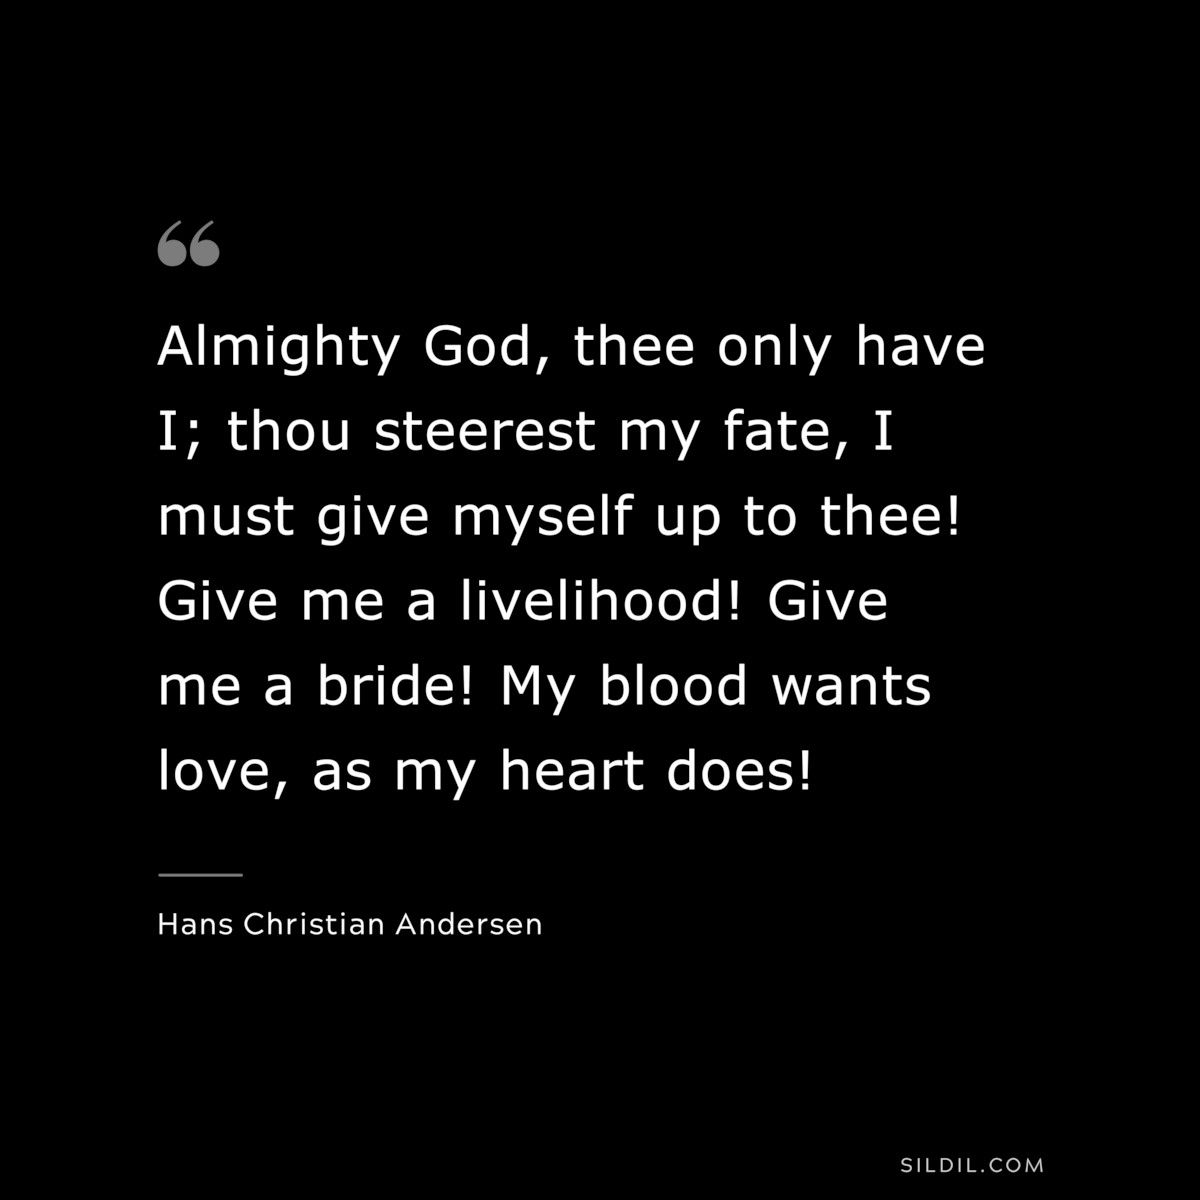 Almighty God, thee only have I; thou steerest my fate, I must give myself up to thee! Give me a livelihood! Give me a bride! My blood wants love, as my heart does! ― Hans Christian Andersen